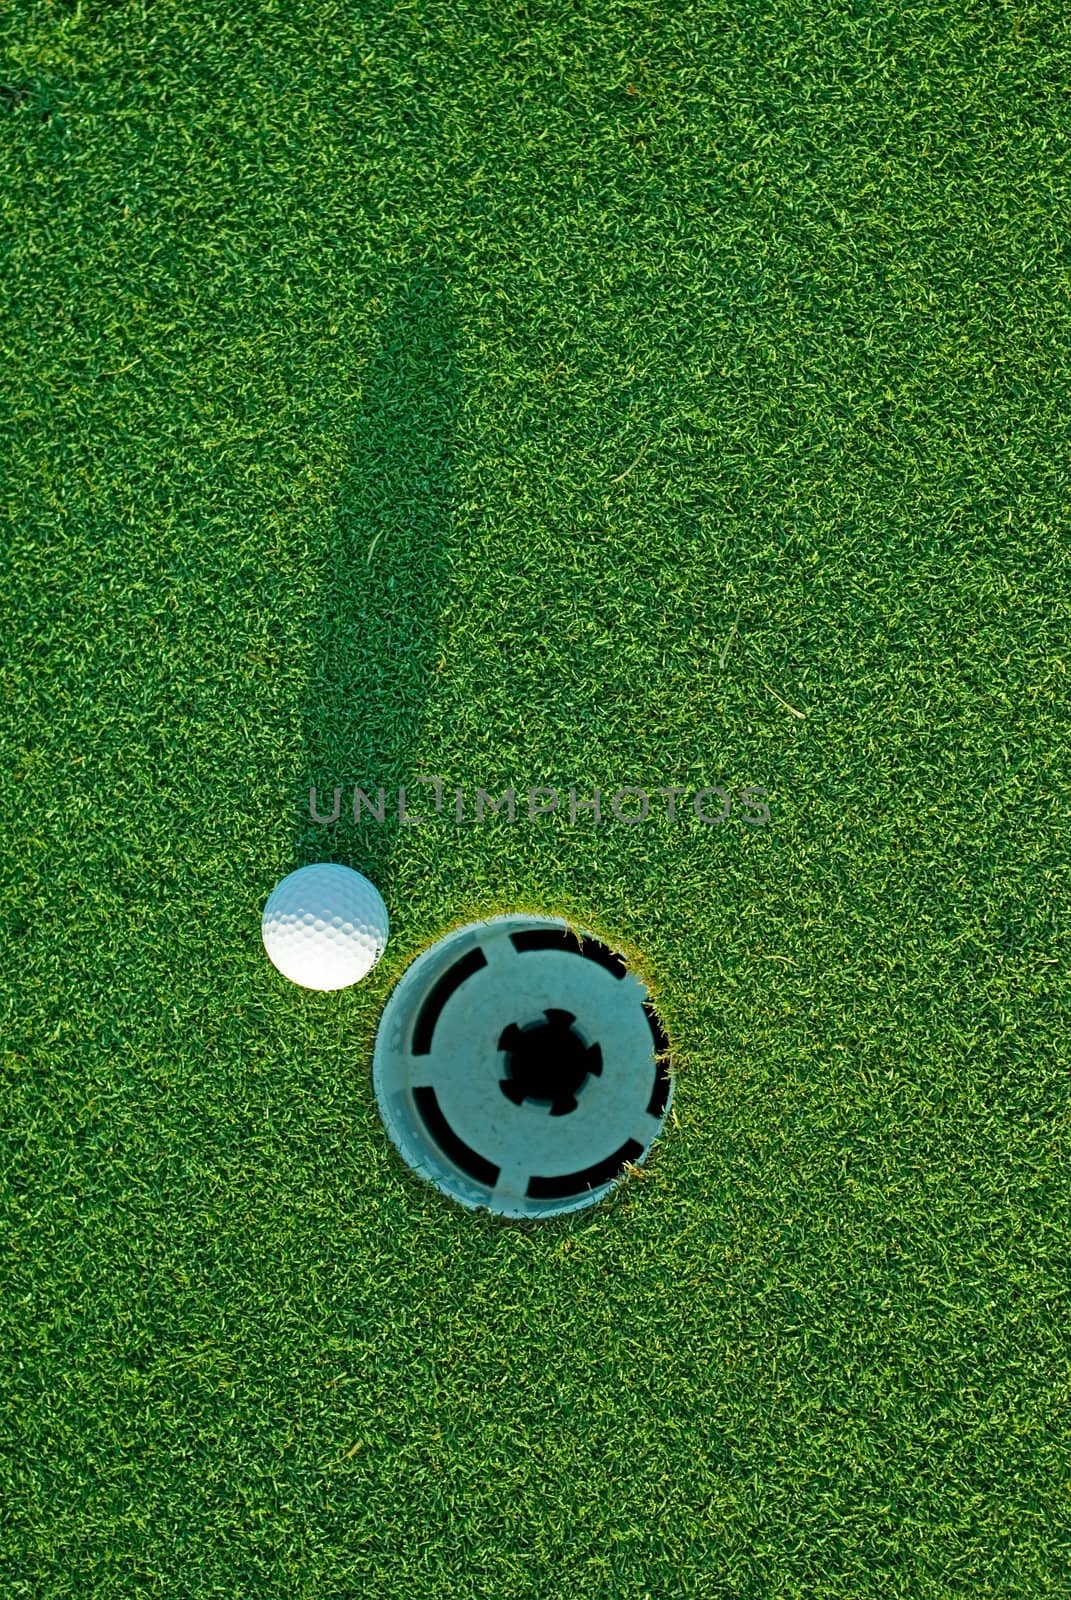 White golf ball on putting green next to hole with long shadow - from top down.